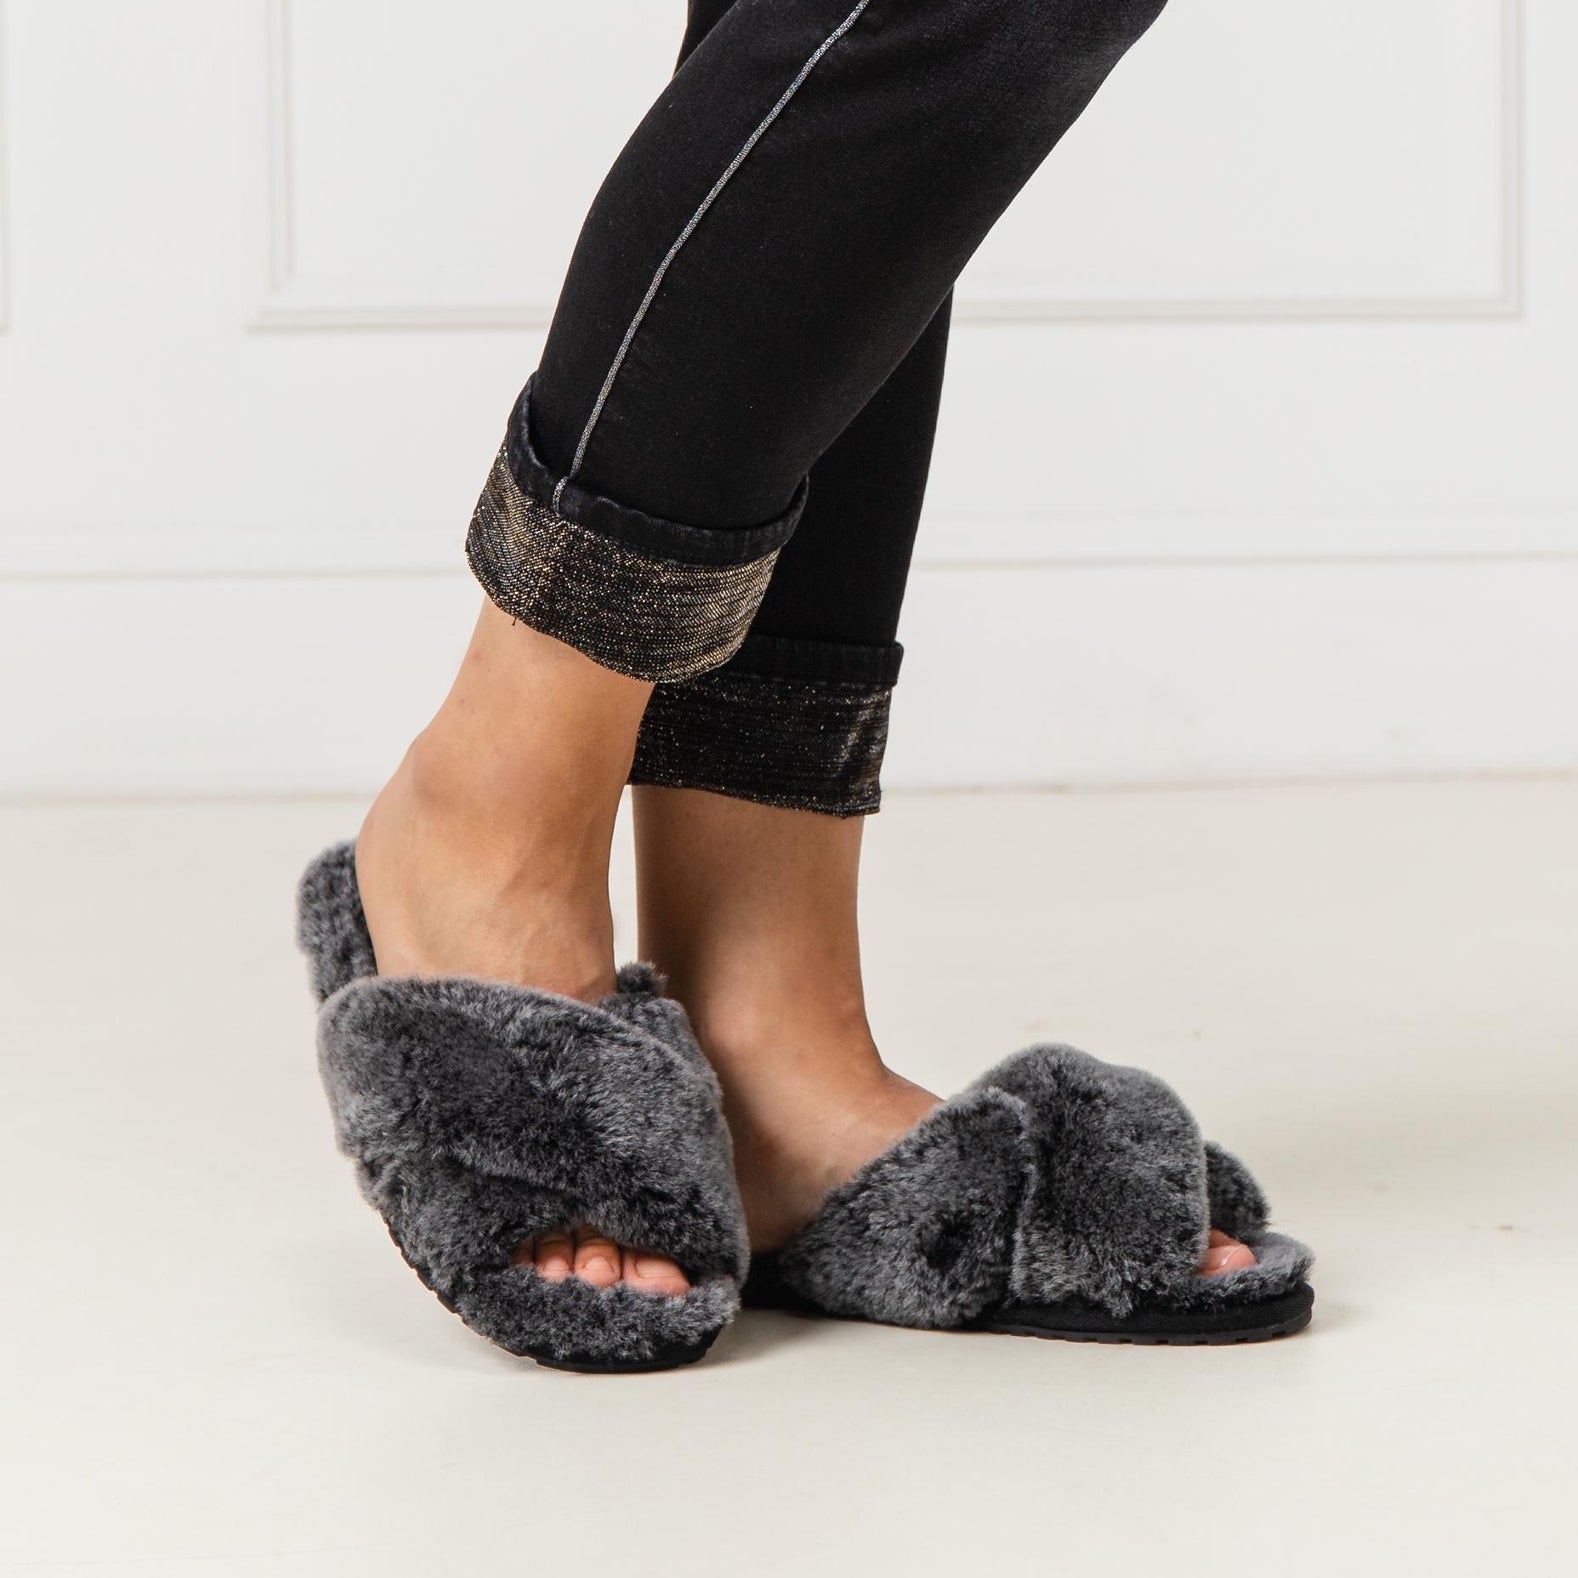 EMU Mayberry Slippers in Frost Black